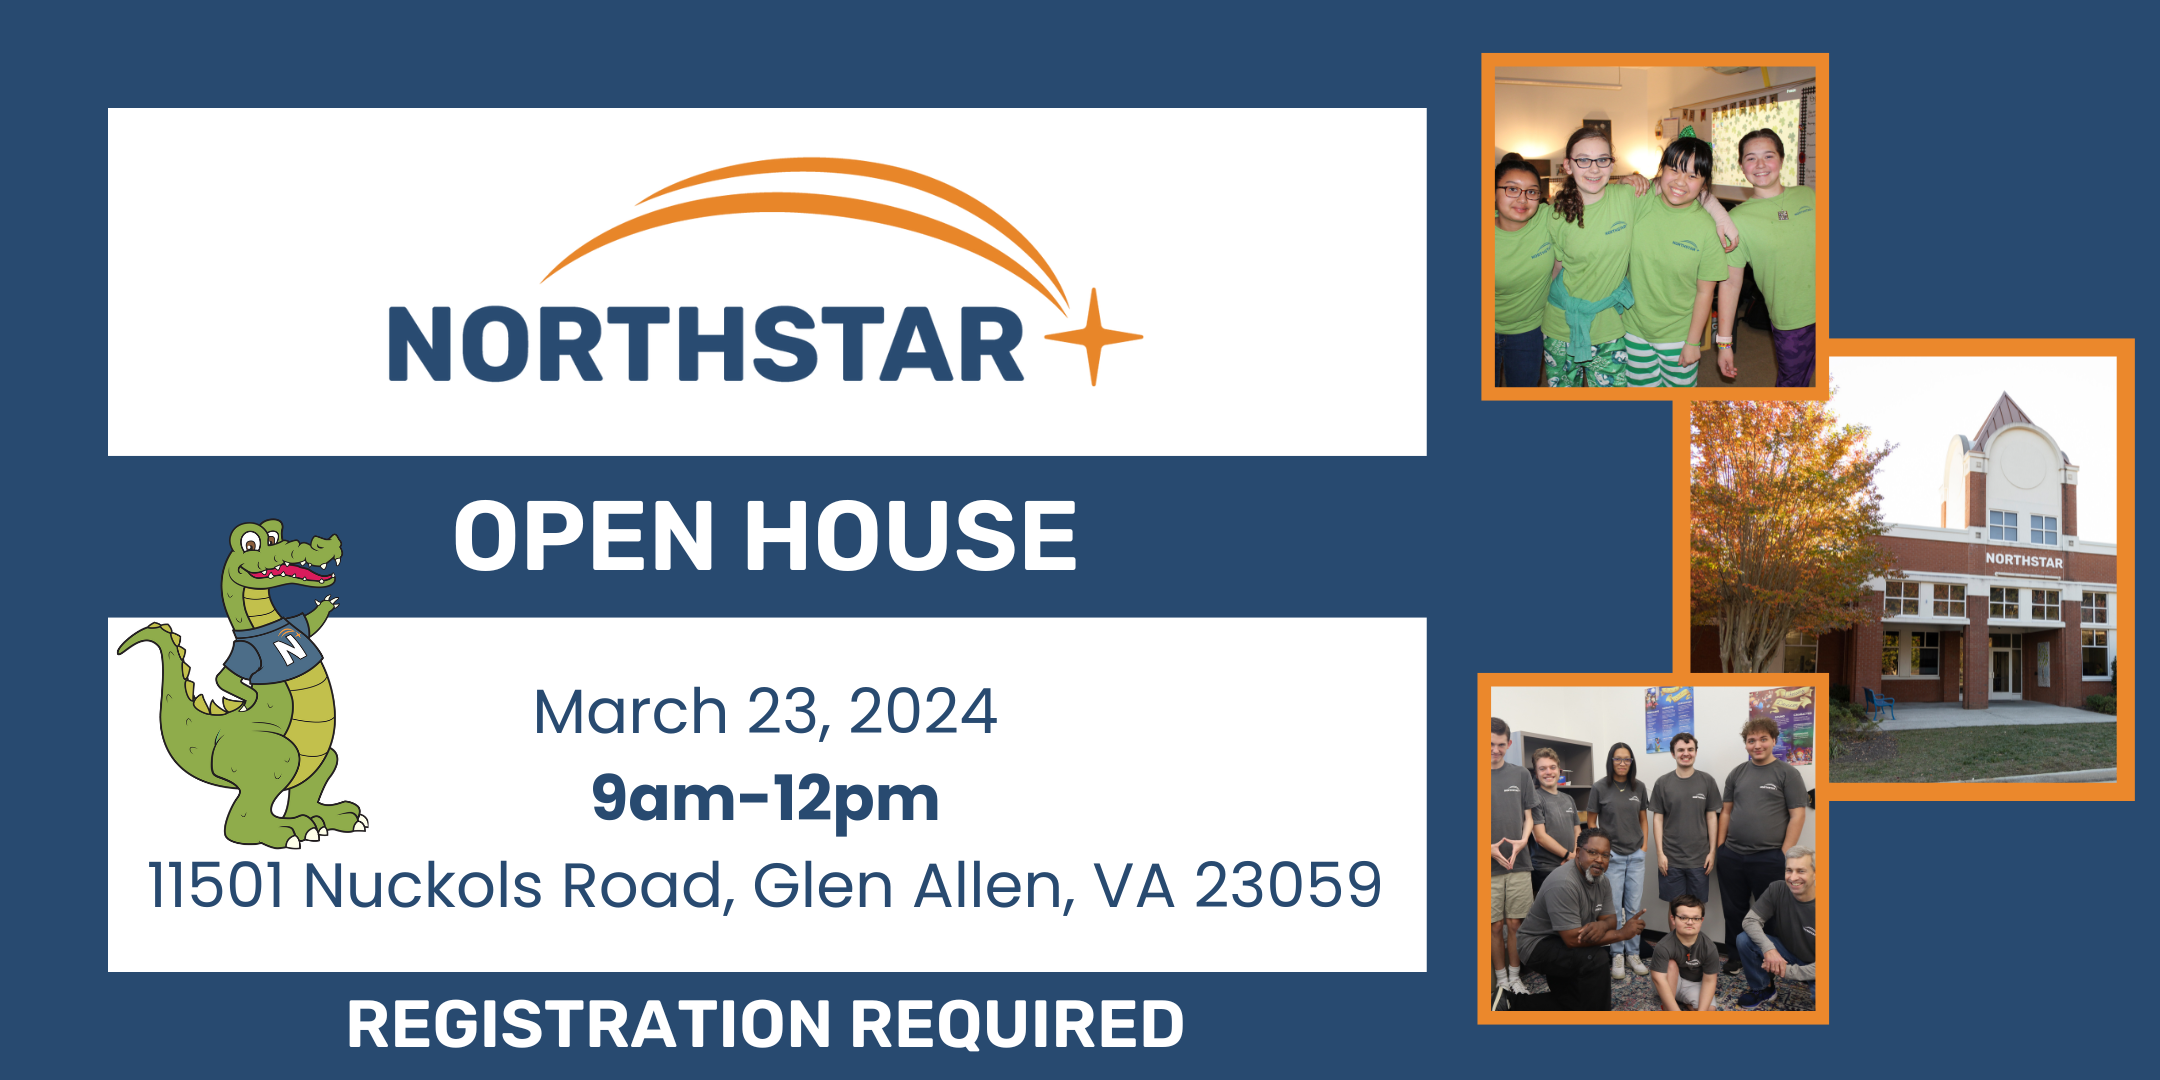 Northstar Open House March 23, 2024 from 9am to 12pm